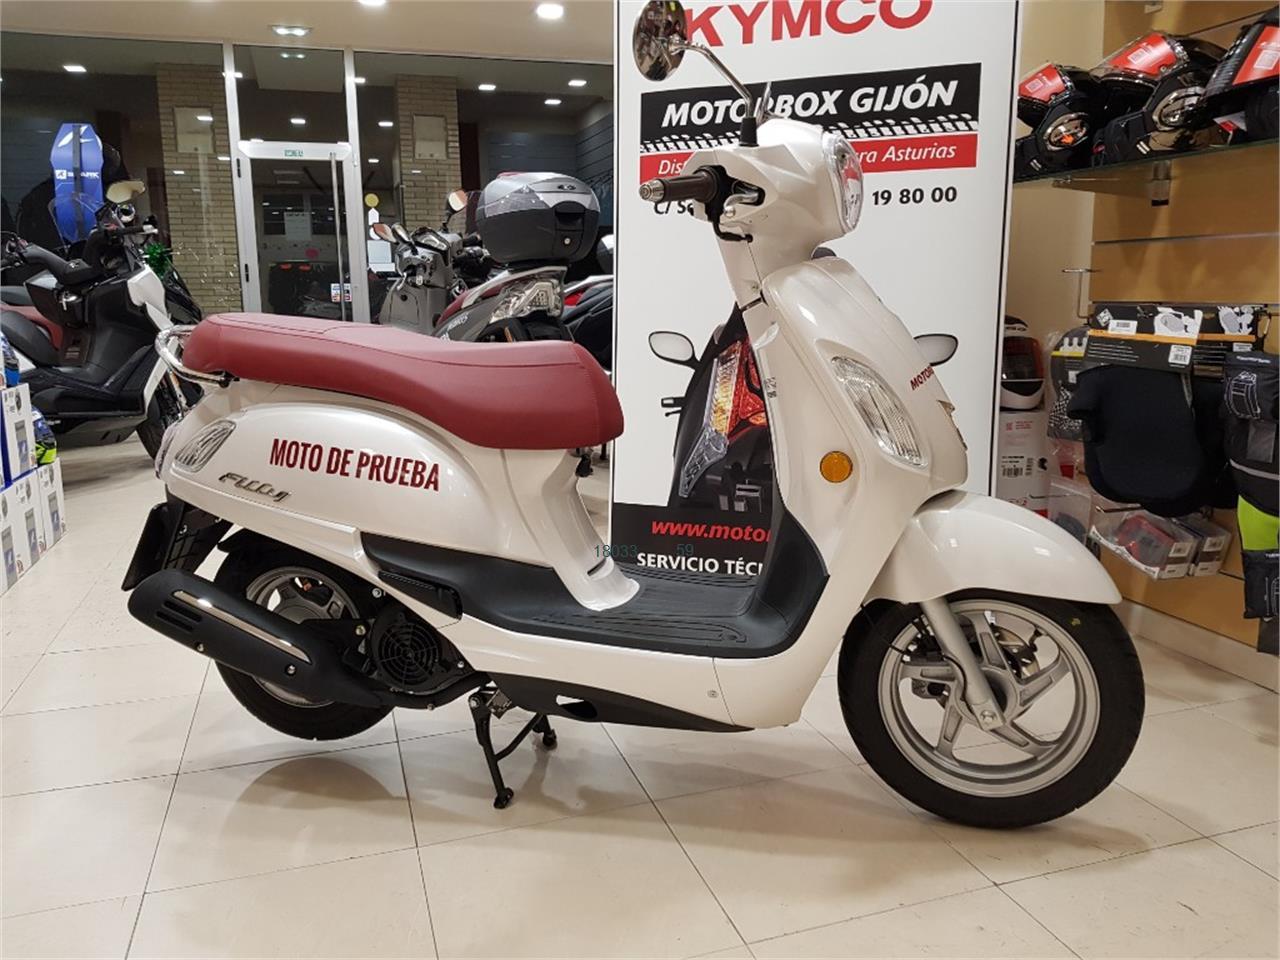 KYMCO FILLY 125